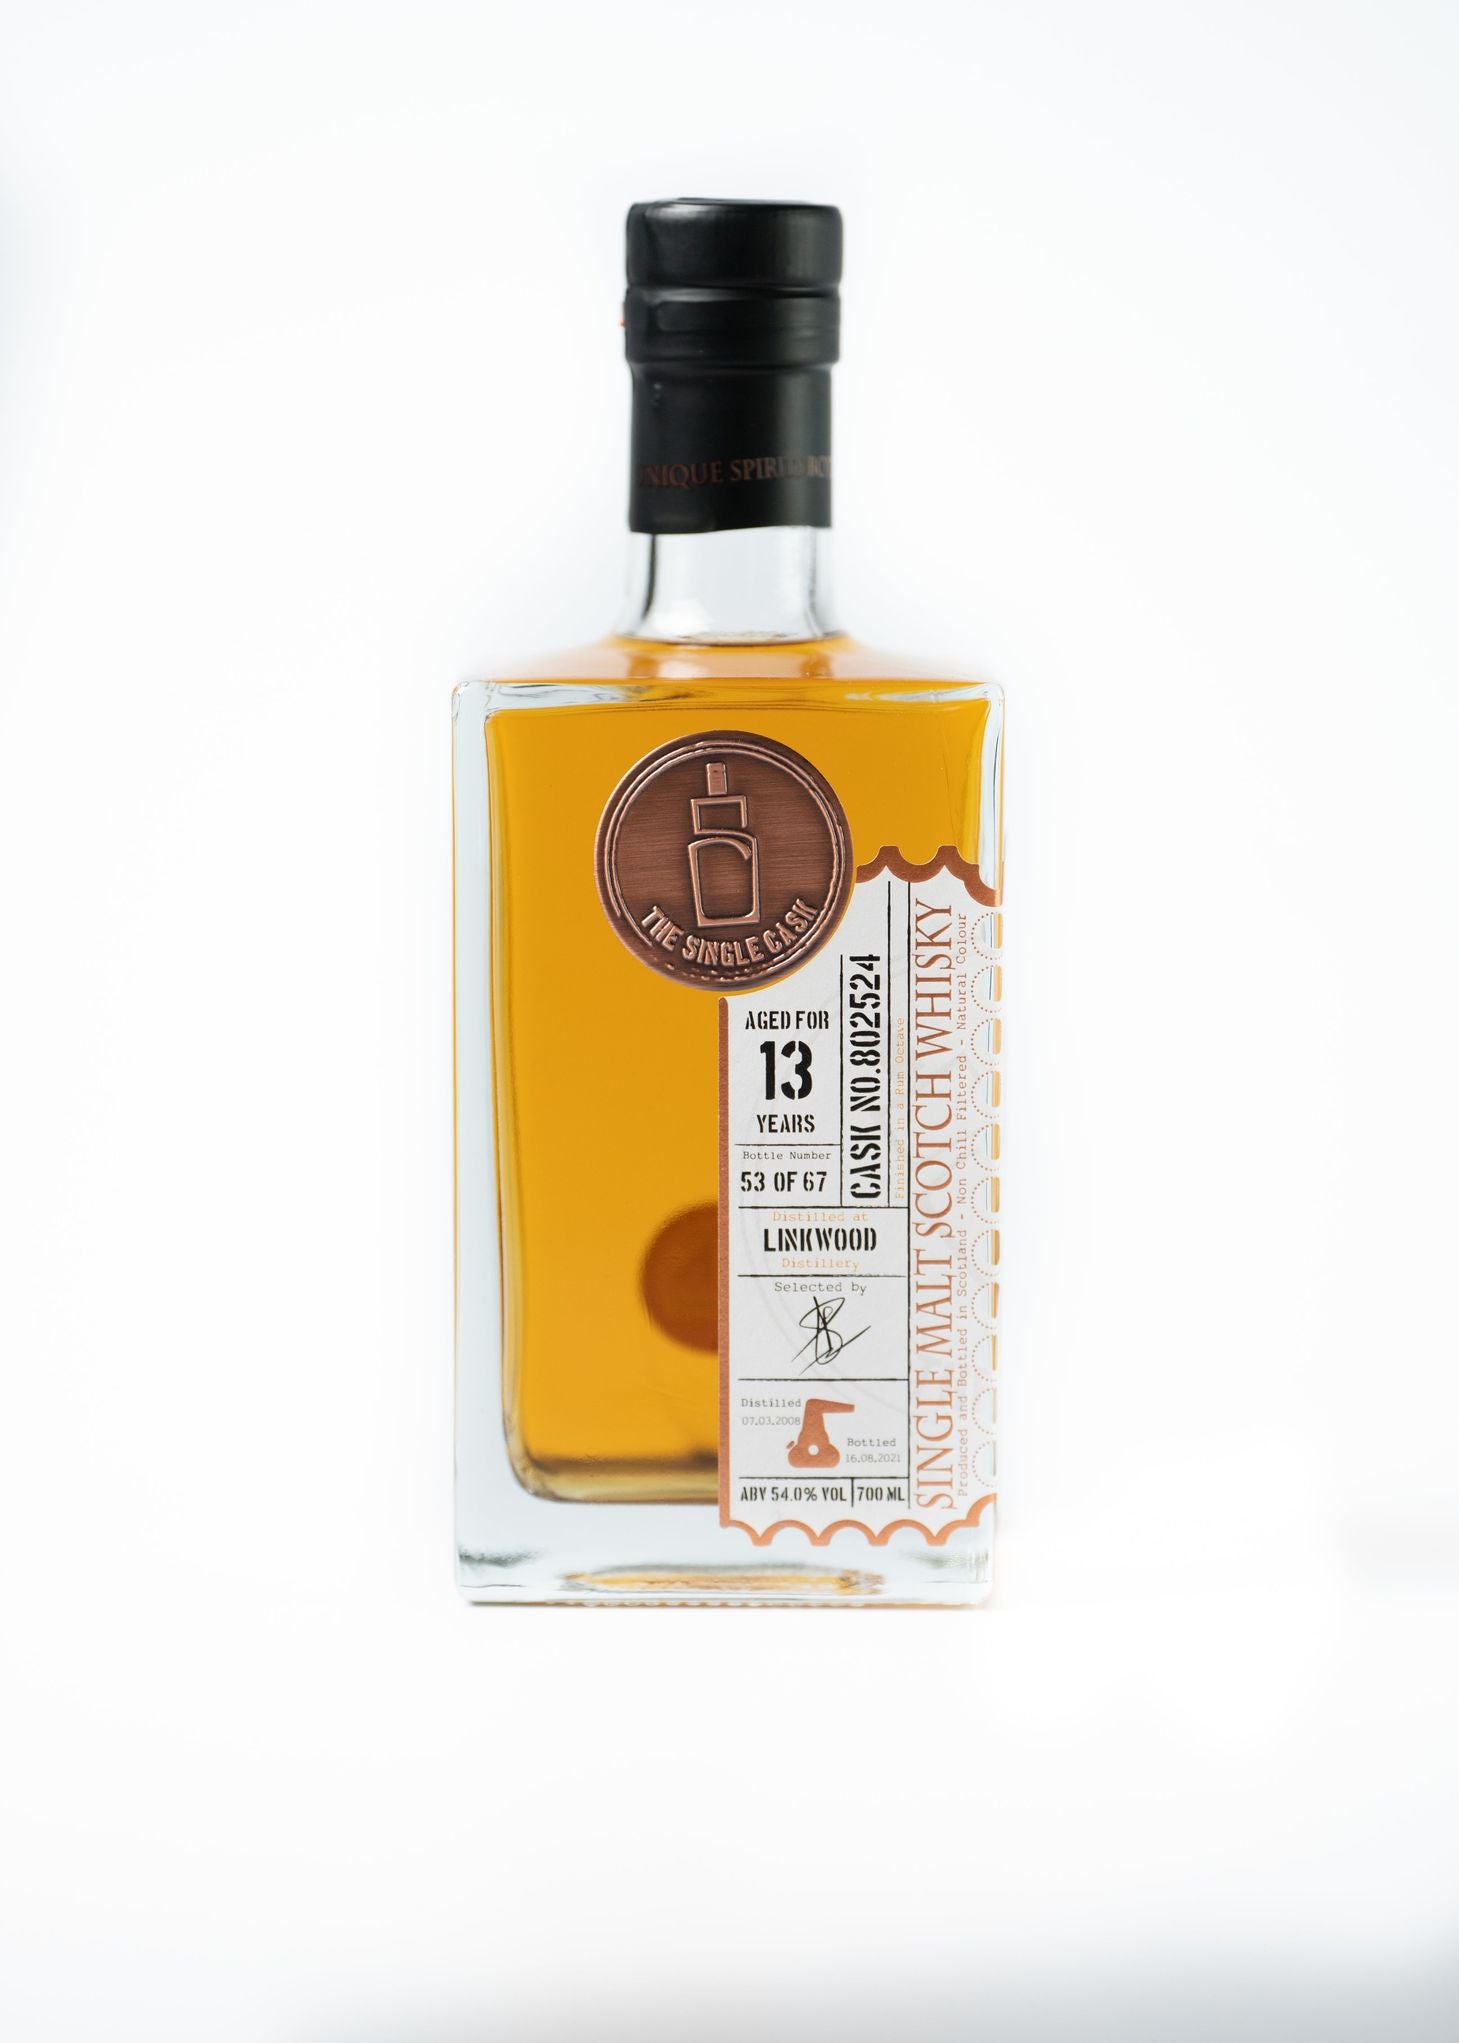 Linkwood 13 years old scotch whisky (Cask 802524) by The Single Cask